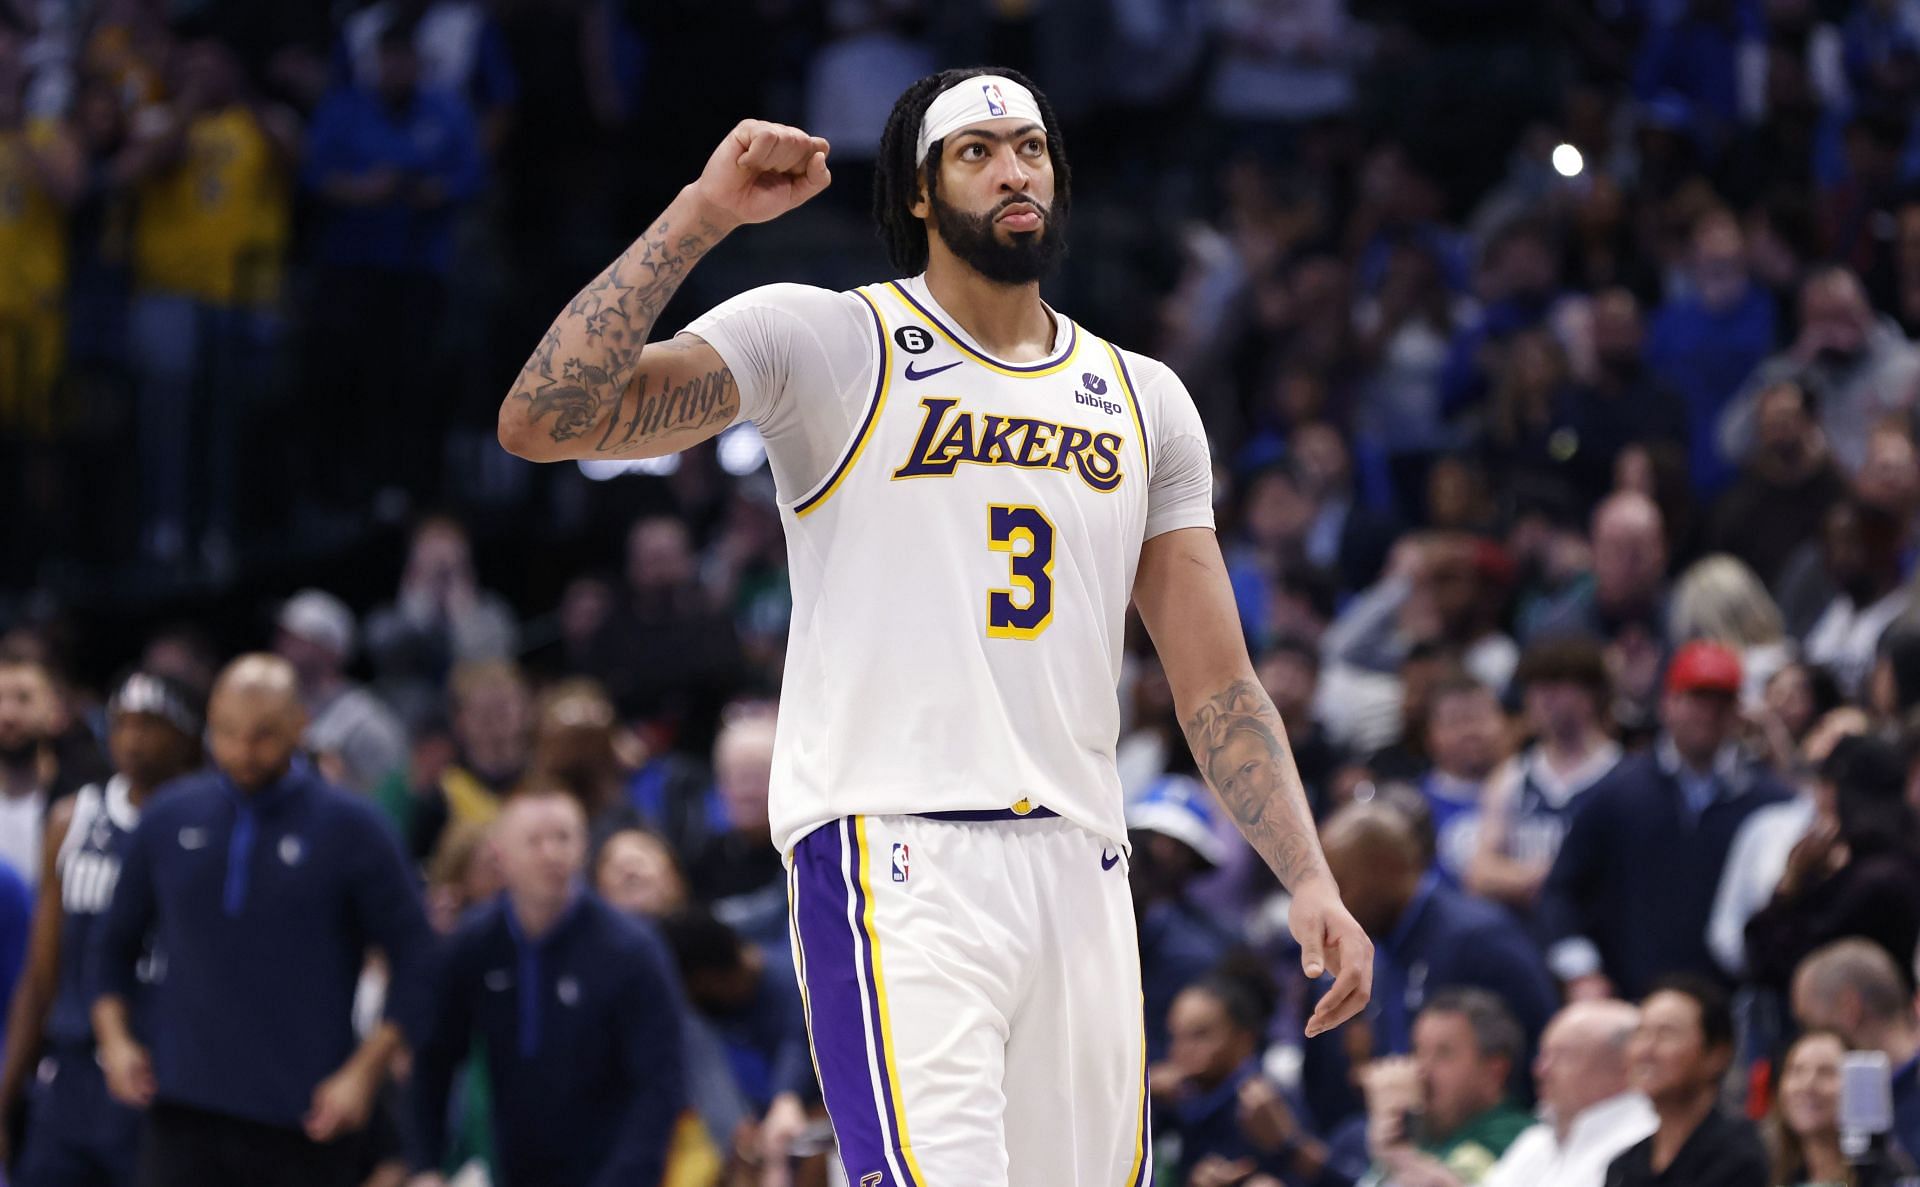 Healthy and happy: LeBron James, Anthony Davis lead Lakers back to